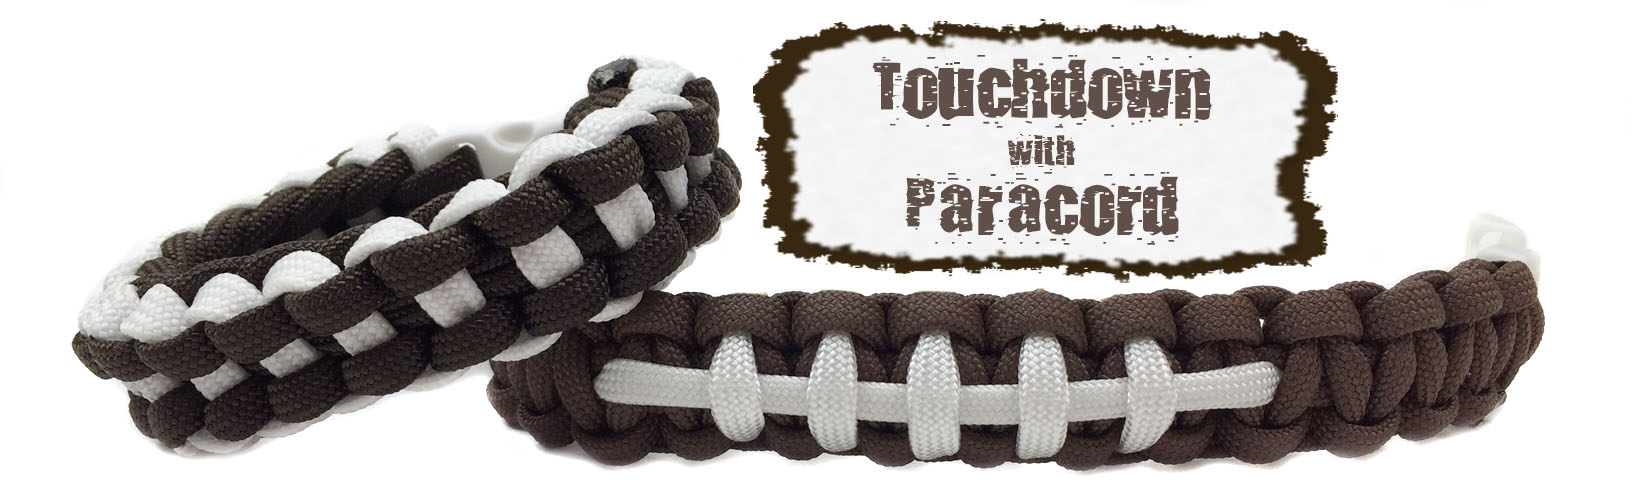 Touchdown with Paracord